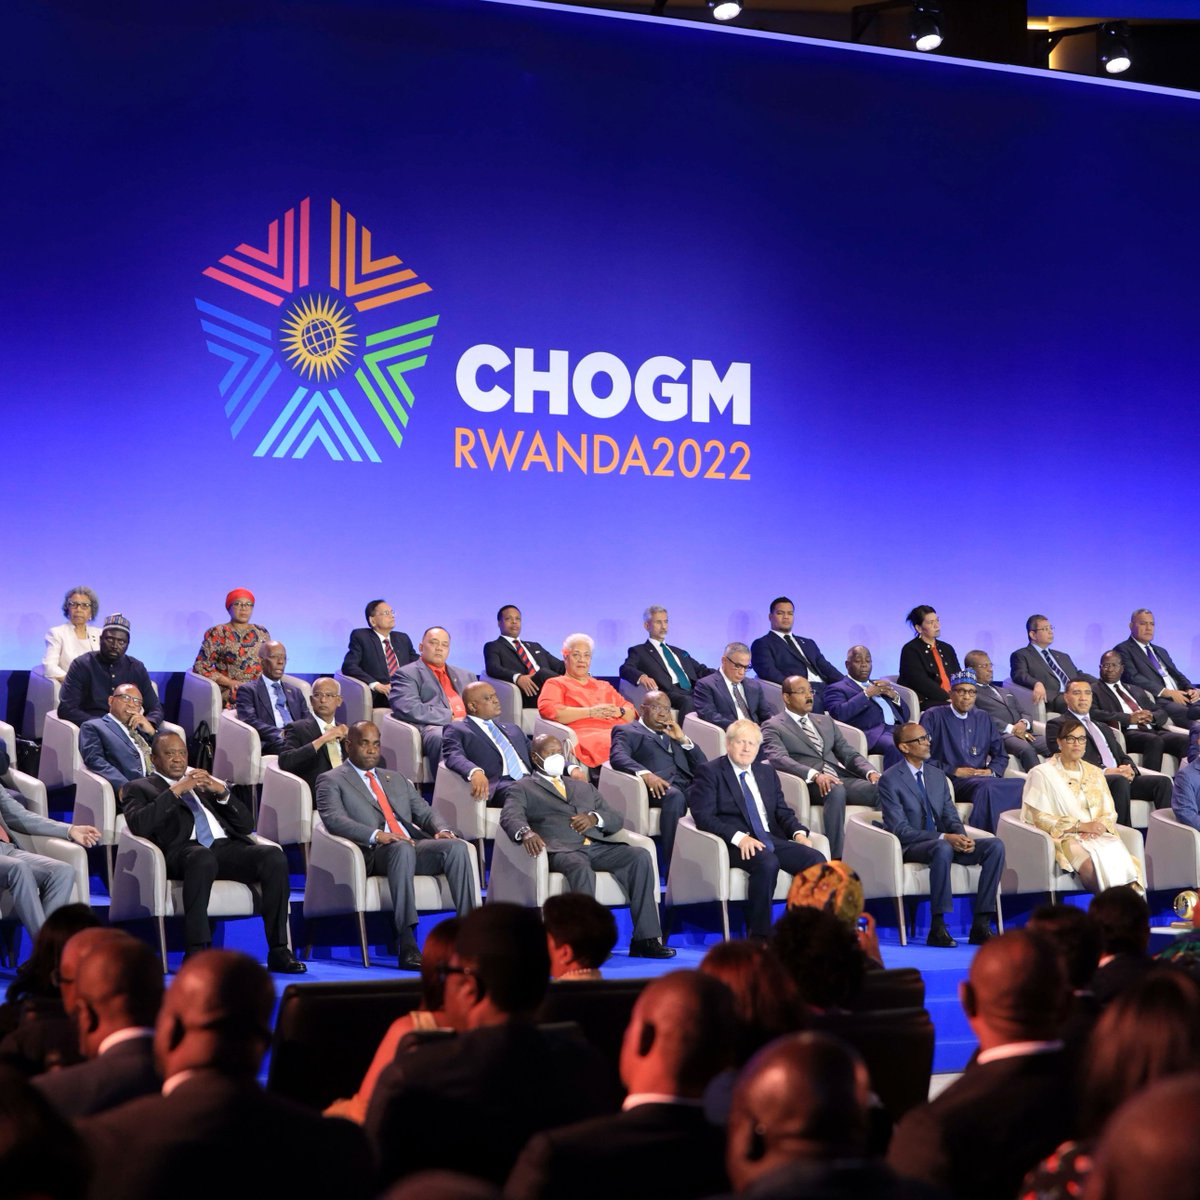 Did you know? The Commonwealth Heads of Government Meeting brings leaders from all corners of the Commonwealth together biennially with the goal of fostering collaboration on pressing global matters.

Fun fact: Canada proudly hosted CHOGM in Ottawa '73 and Vancouver '87! 🇨🇦